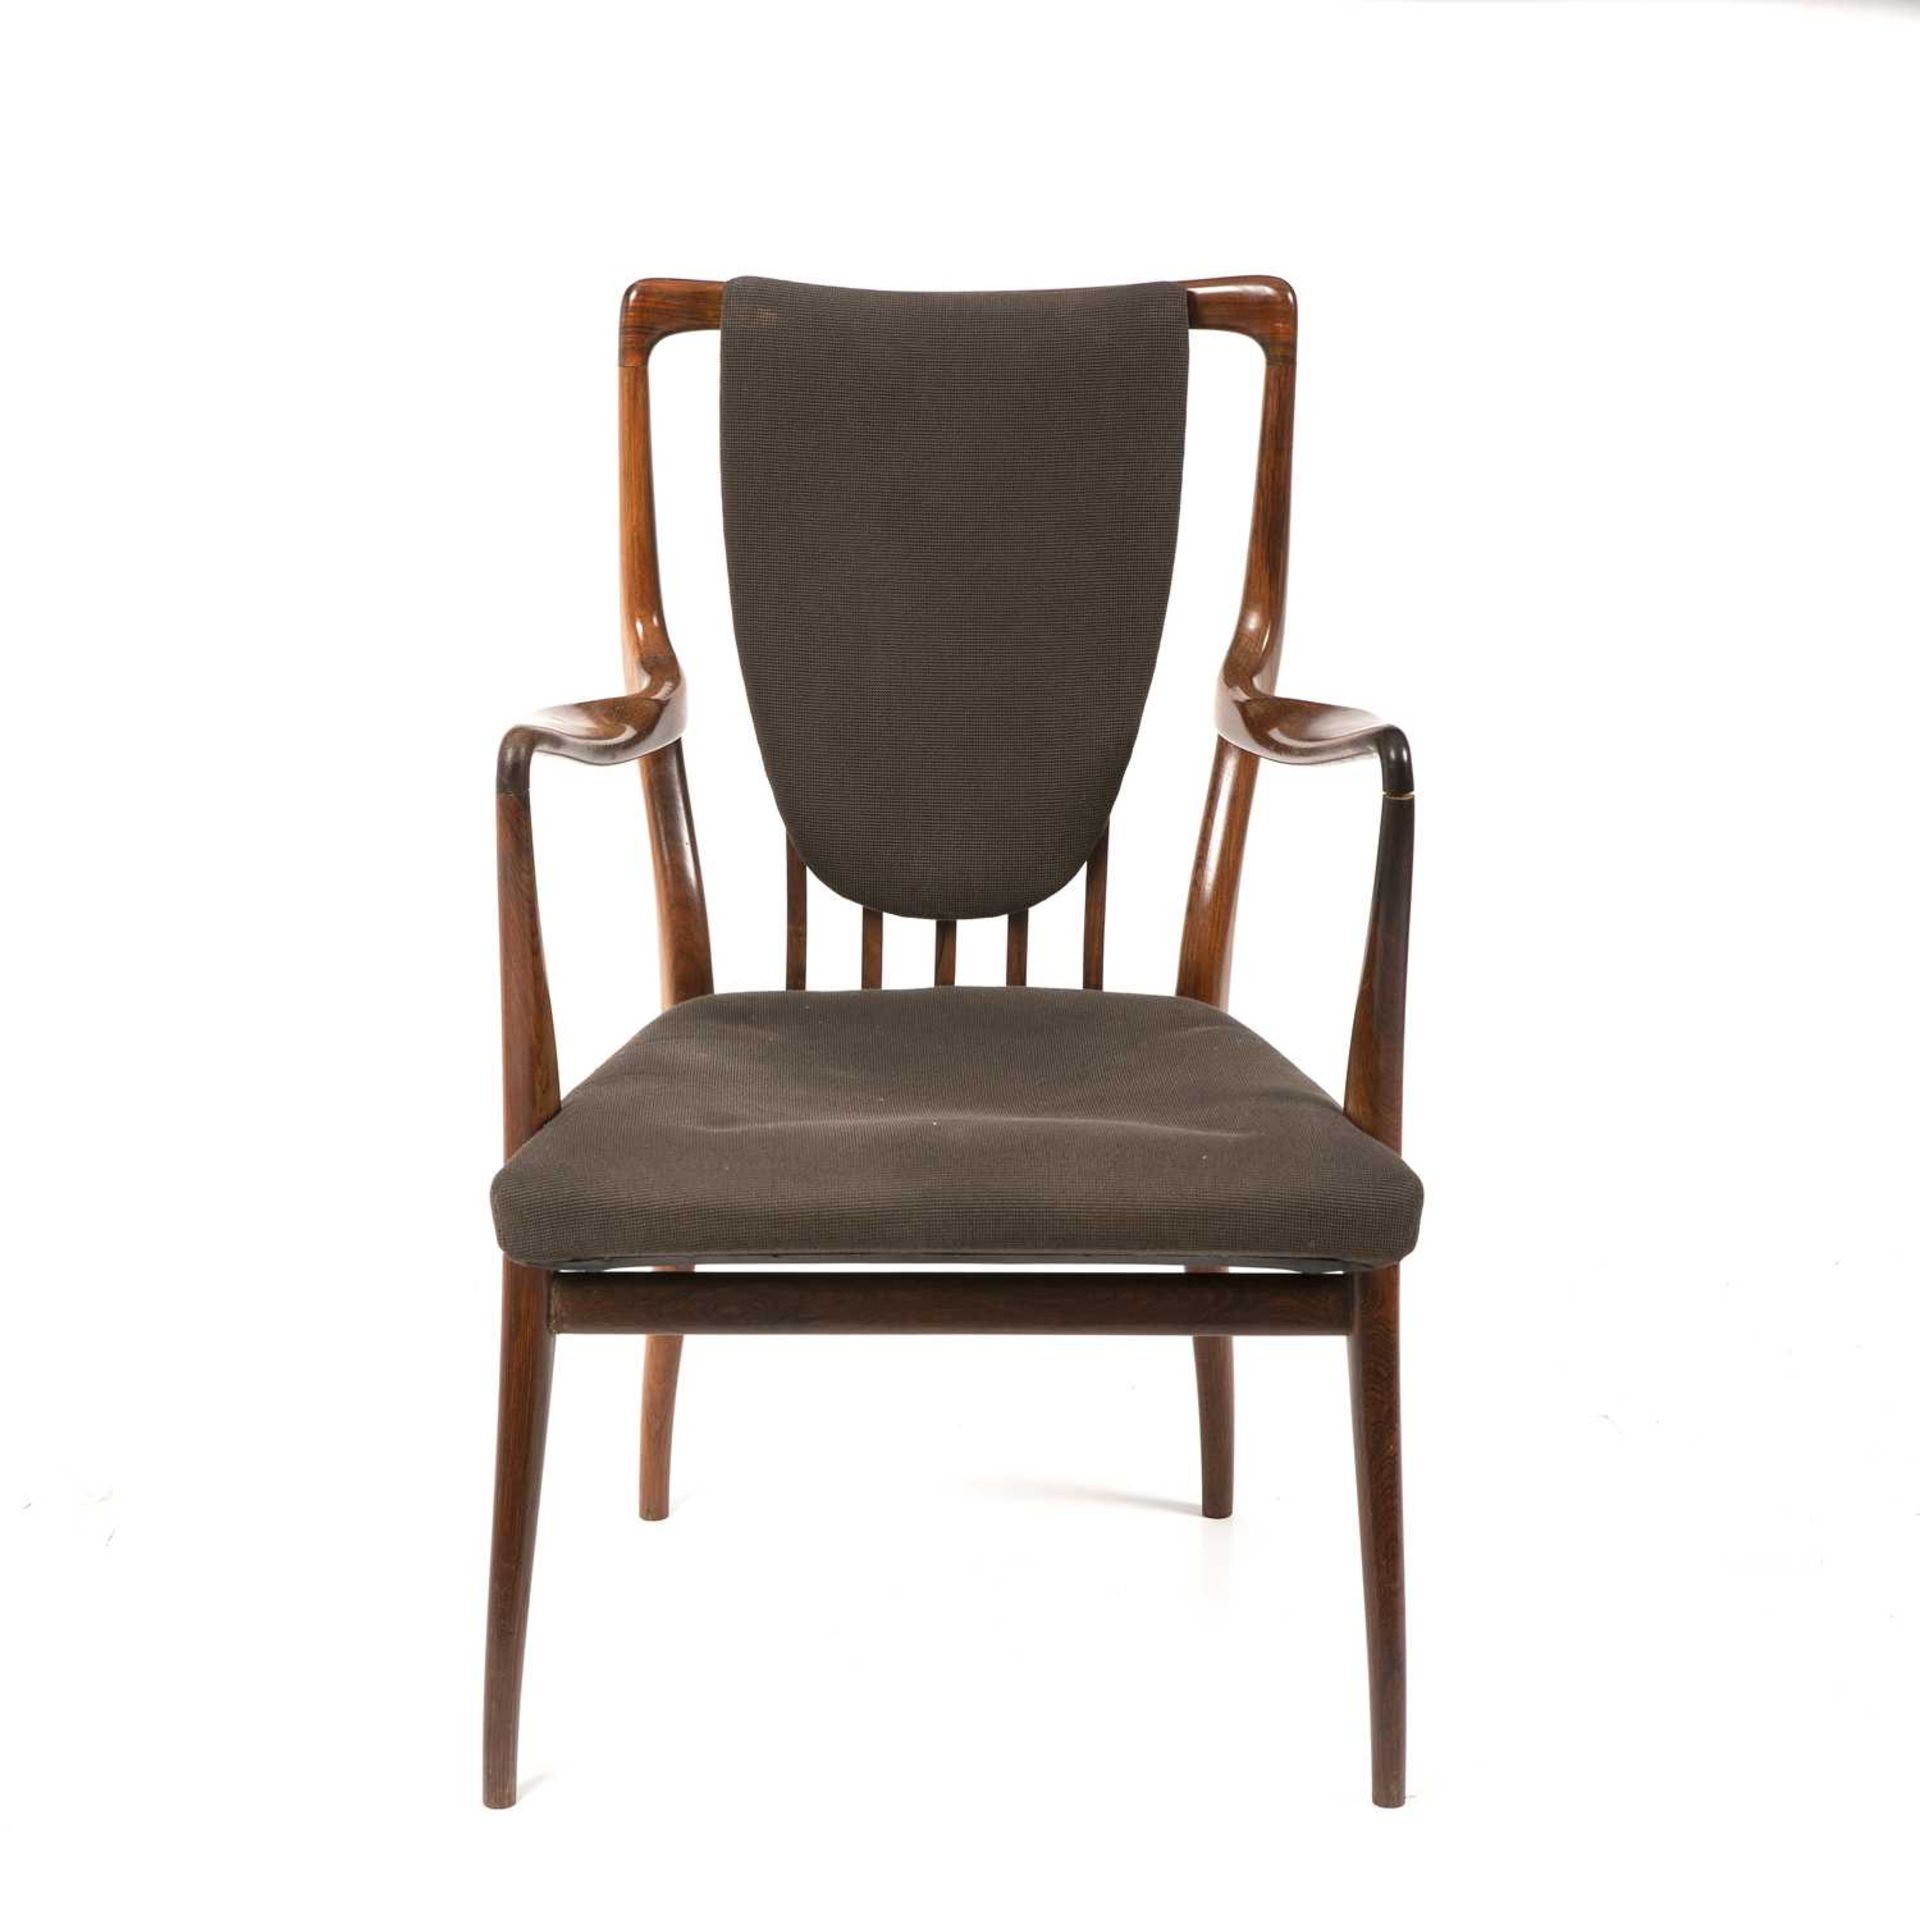 Andrew John Milne Armchair with upholstered seat 91cm high, 56cm wide, 52cm deep. - Image 2 of 5